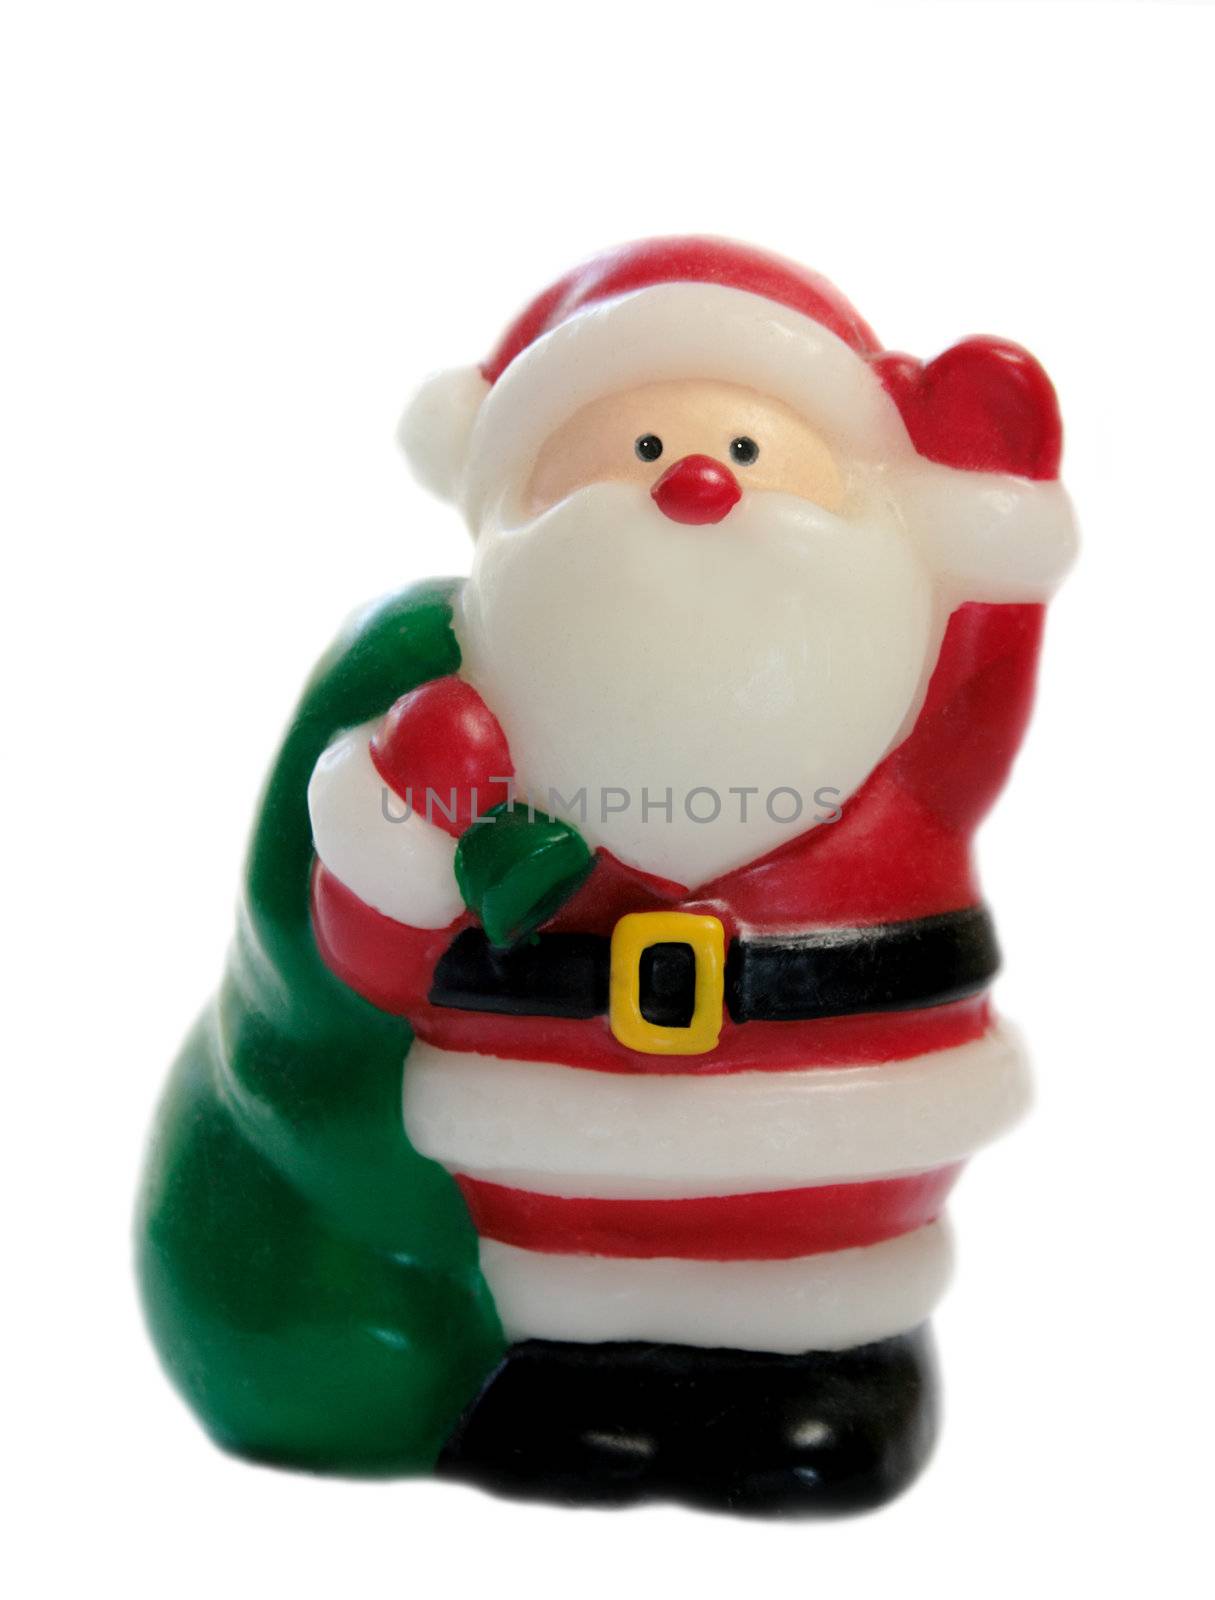 a Santa Claus figure with bright eyes and a green bag full of goodies